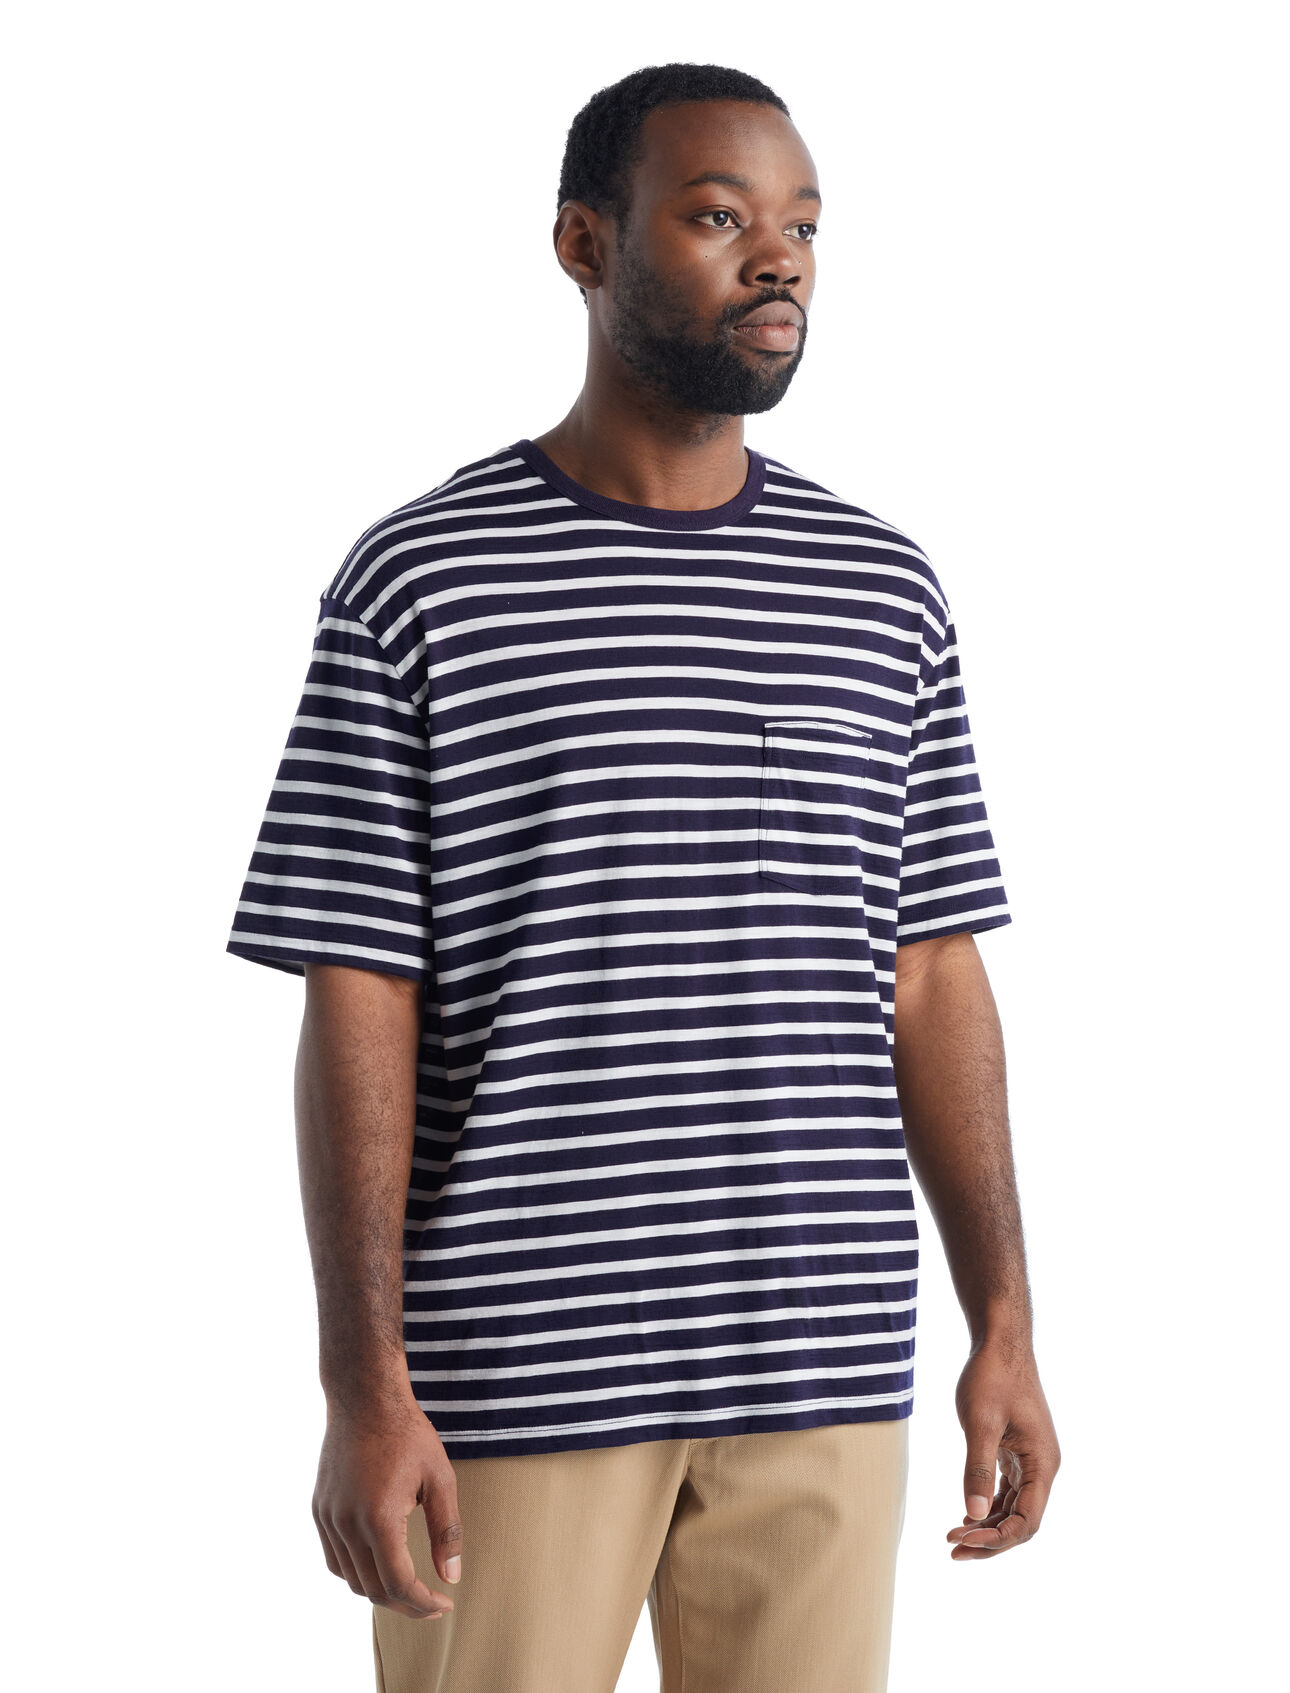 Mens Merino Granary Short Sleeve Pocket Stripe T-Shirt A classic striped pocket tee with a relaxed fit and soft, breathable, 100% merino wool fabric, the Granary Short Sleeve Pocket Tee Stripe is all about everyday, all-natural comfort.